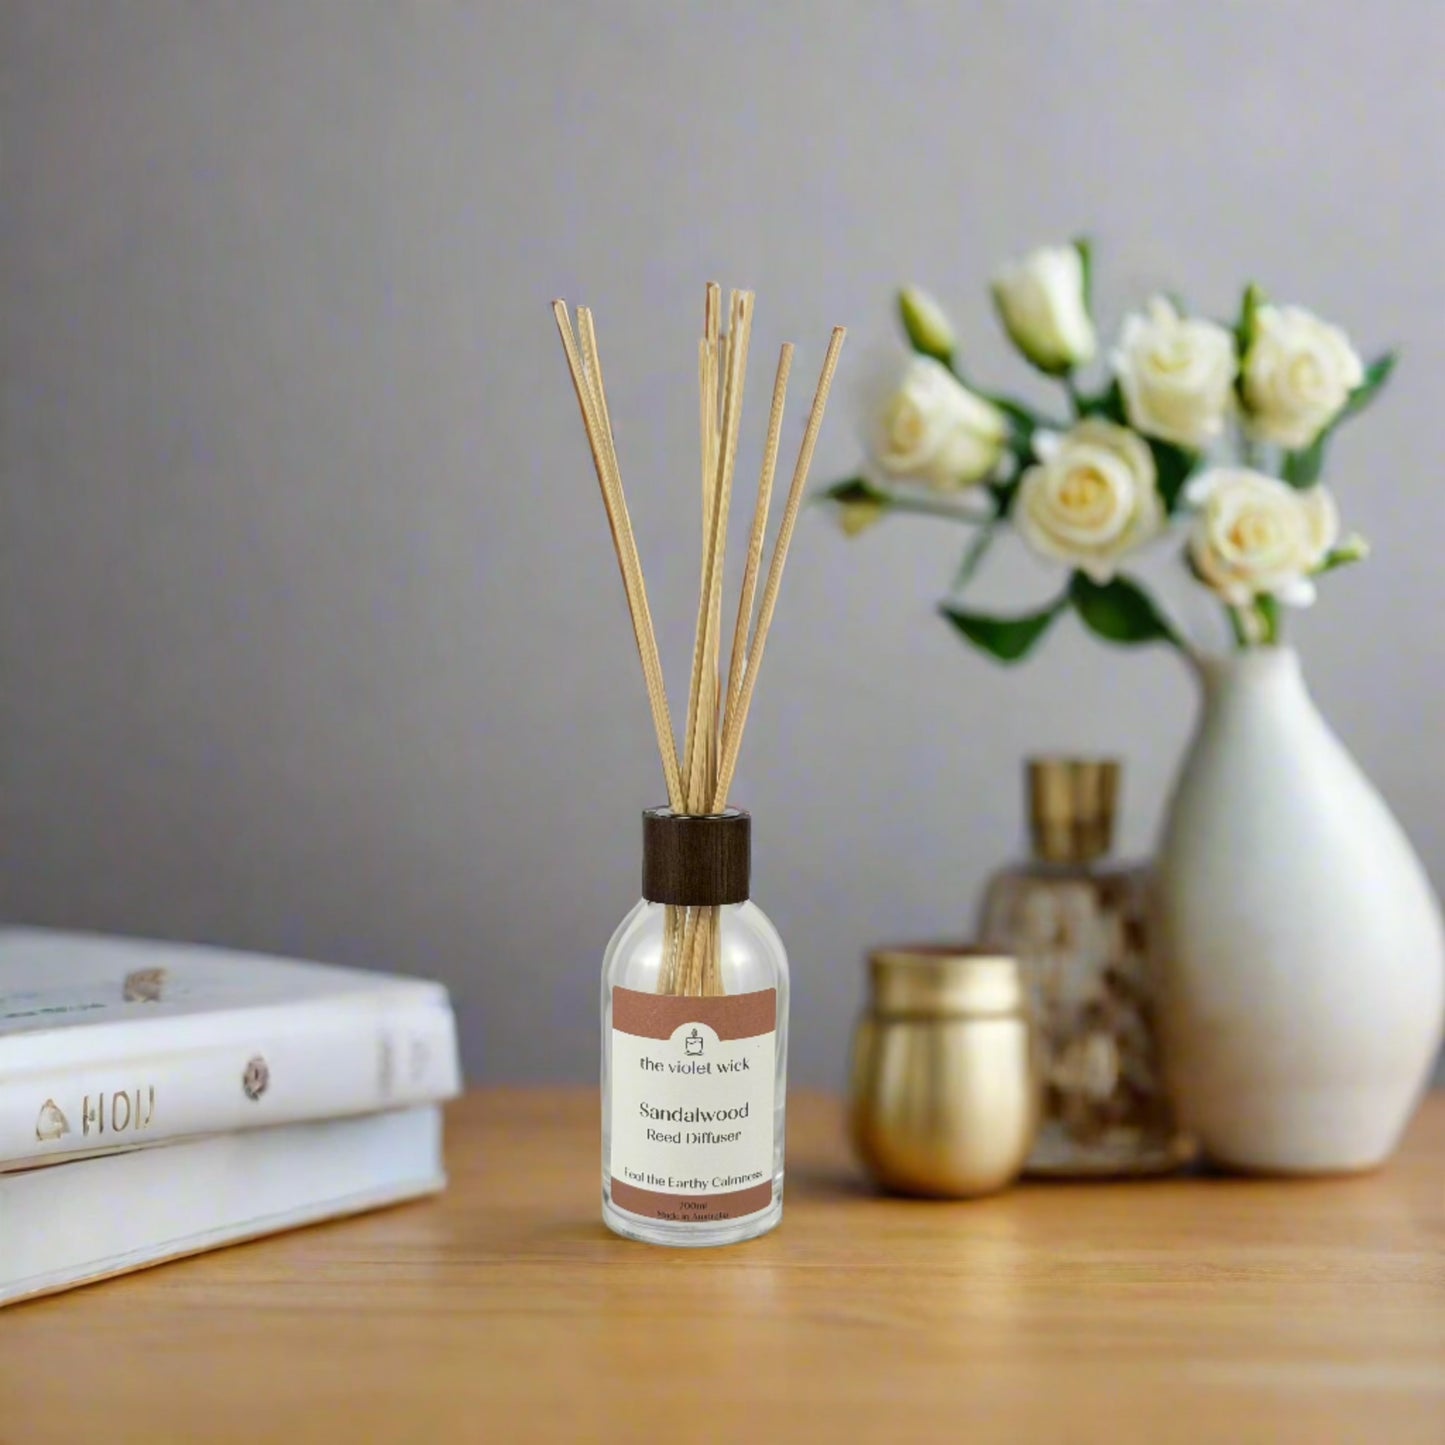 Sandalwood reed diffuser from The Violet Wick